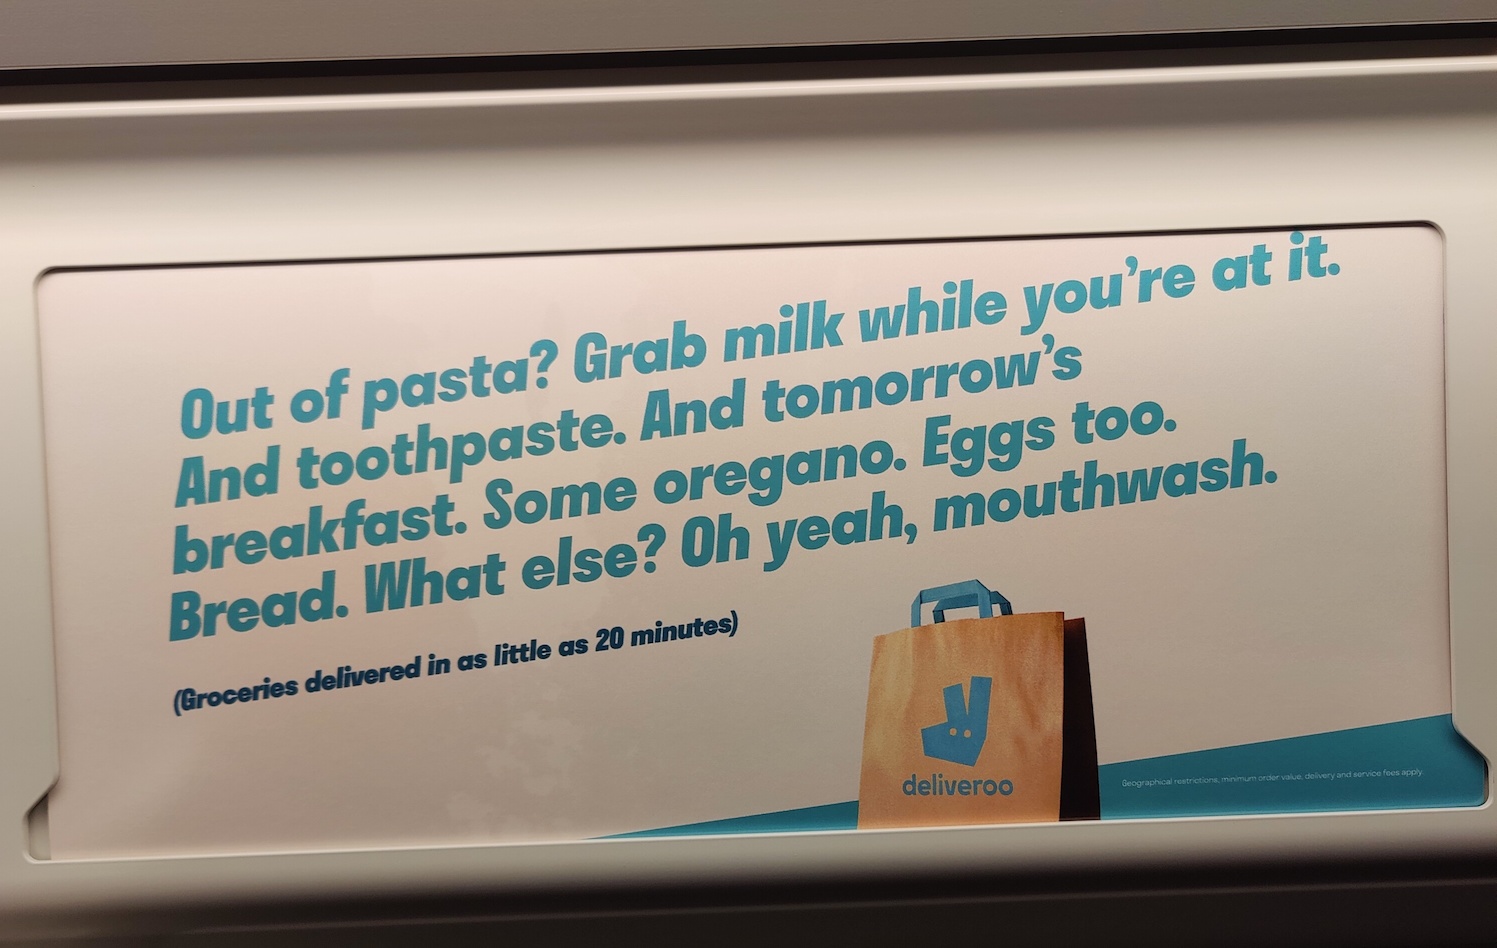 Out of pasta? Grab milk while you're at it. And toothpaste. And tomorrow's breakfast. Some oregano. Eggs too. Bread.
What else?
Oh yeah, mouthwash.
(Groceries delivered in as little as 20 minutes.)